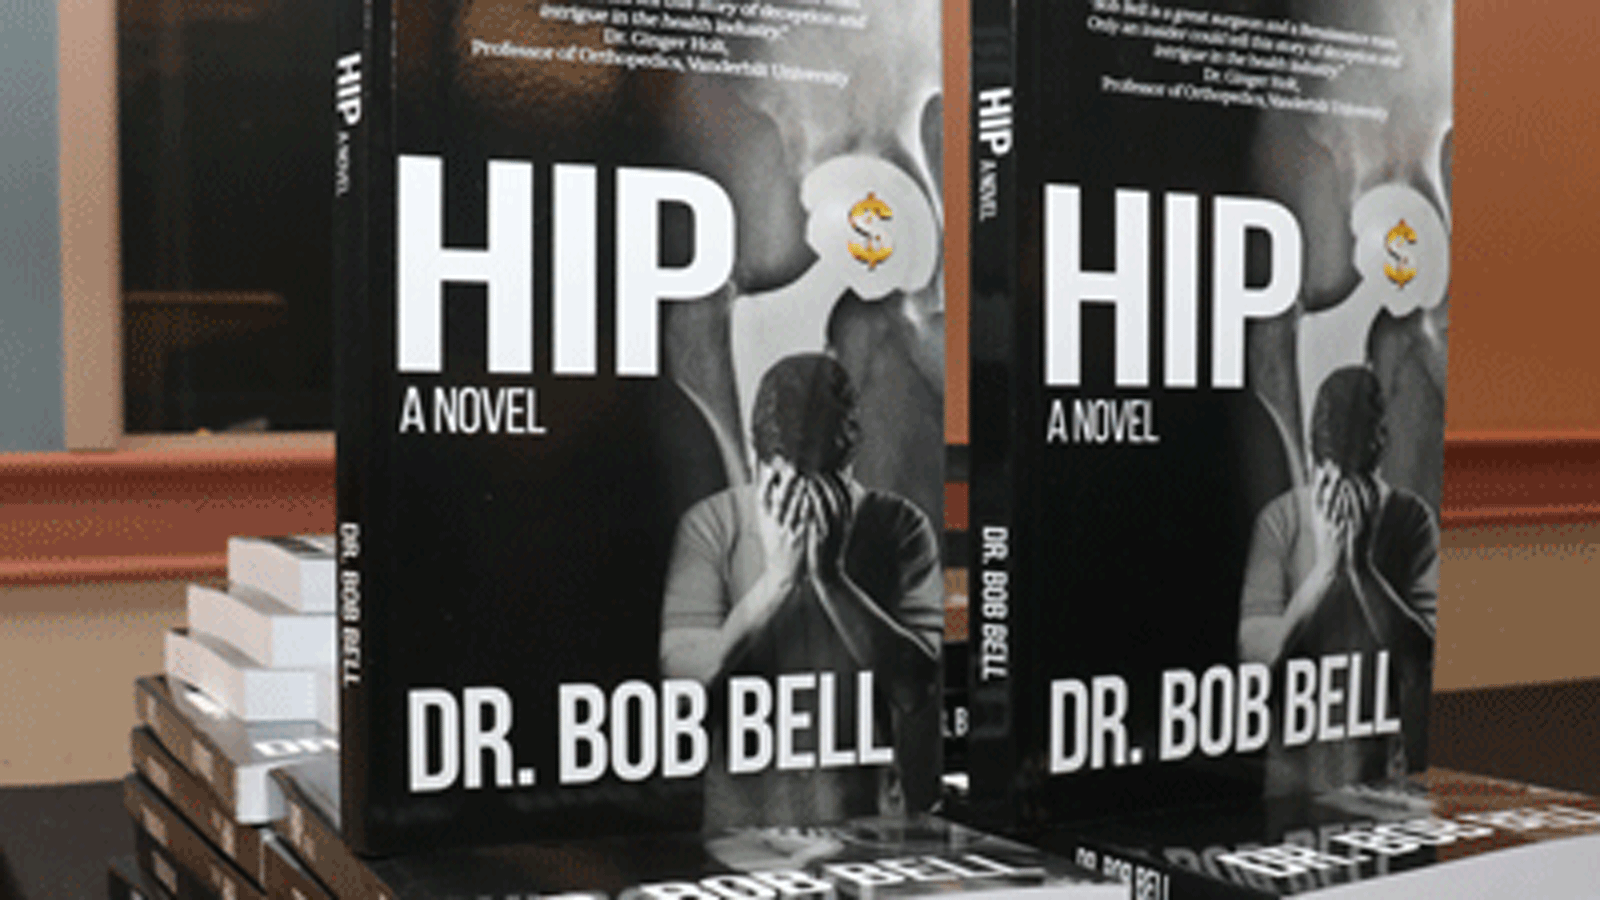 Dr. Bell launches fictional novel, Hip, and donates all proceeds to Princess Margaret Cancer Centre